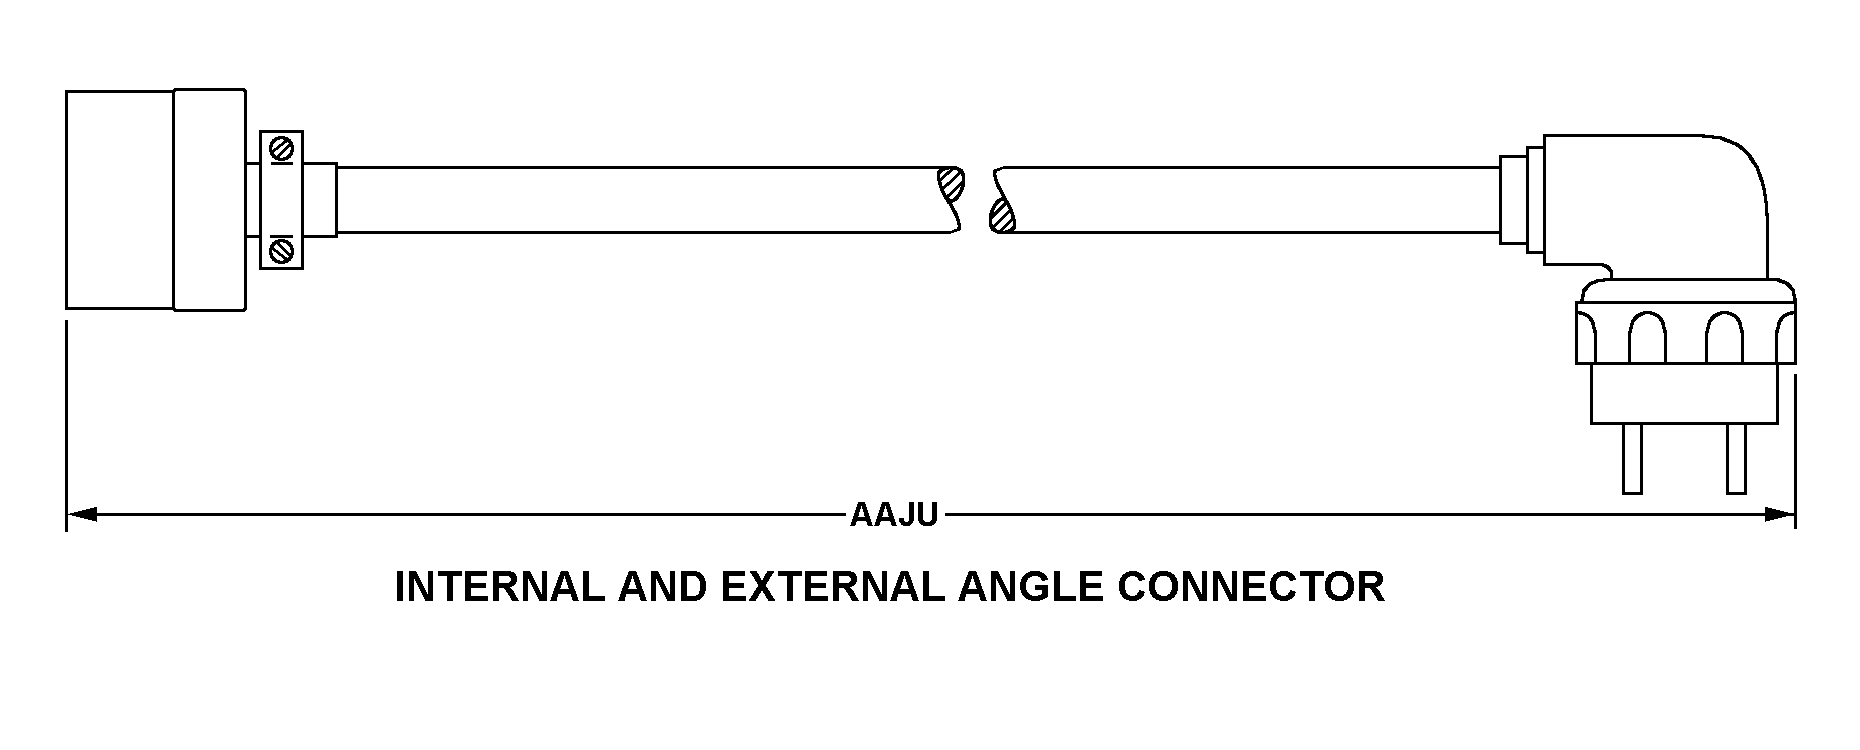 INTERNAL AND EXTERNAL ANGLE CONNECTOR style nsn 5995-01-076-5795